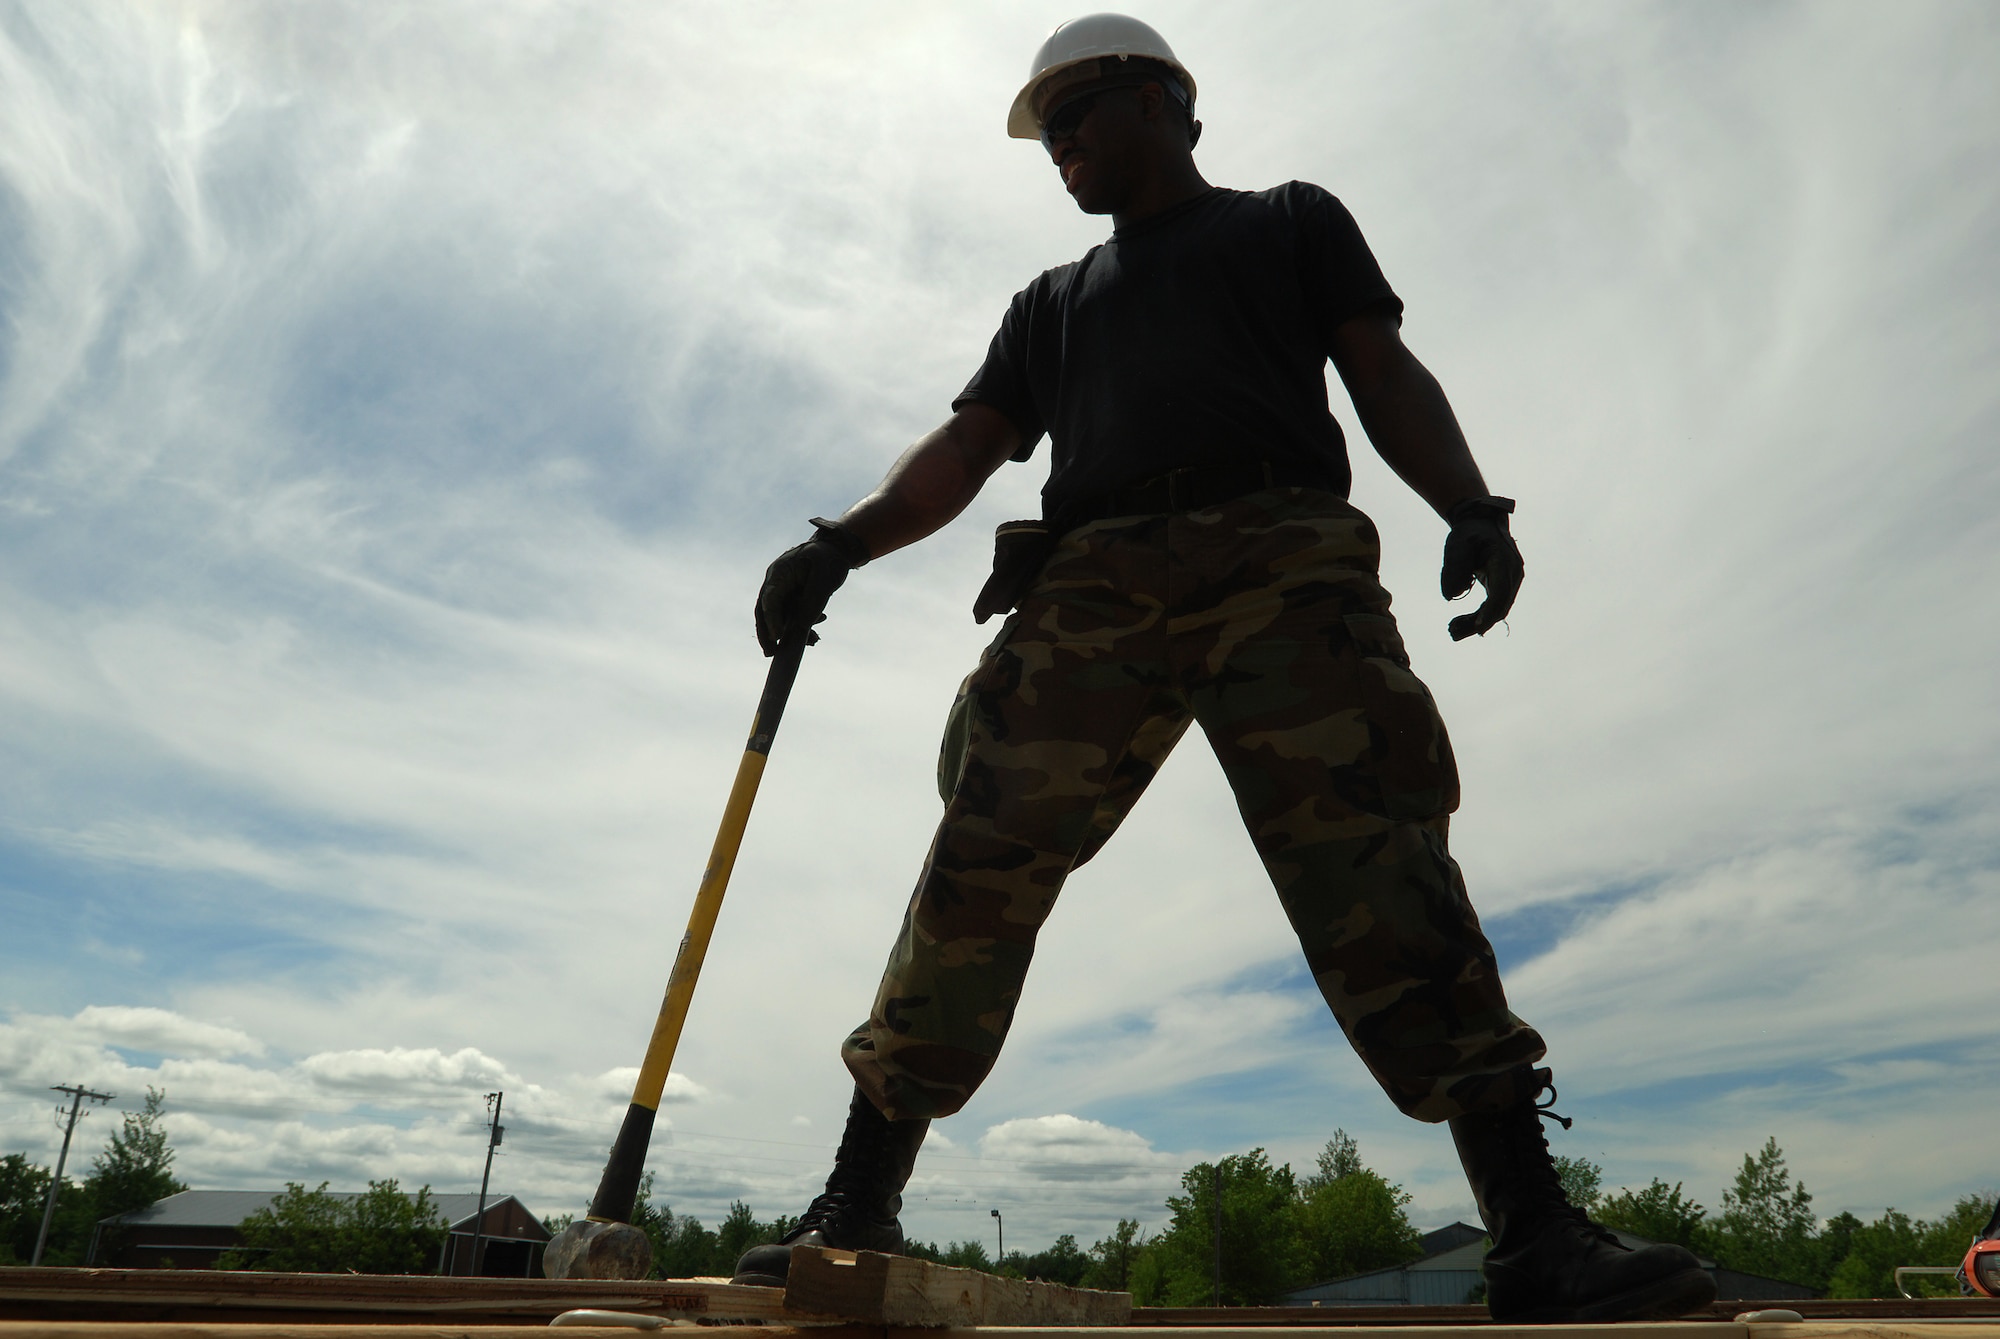 Members of the 433rd Civil Engineering Squadron conduct a humanitarian mission in the Red Lake Indian Reservation for the Red Lake band of Chippewa Indians, just outside of Bemidji, Minnesota. Tech. Sgt. Mark Johnson, 433rd CES, holds the hammer he uses to align the sheets of plywood used for the subfloor.(U.S. Air Force photo/Airman 1st Class Brian McGloin)